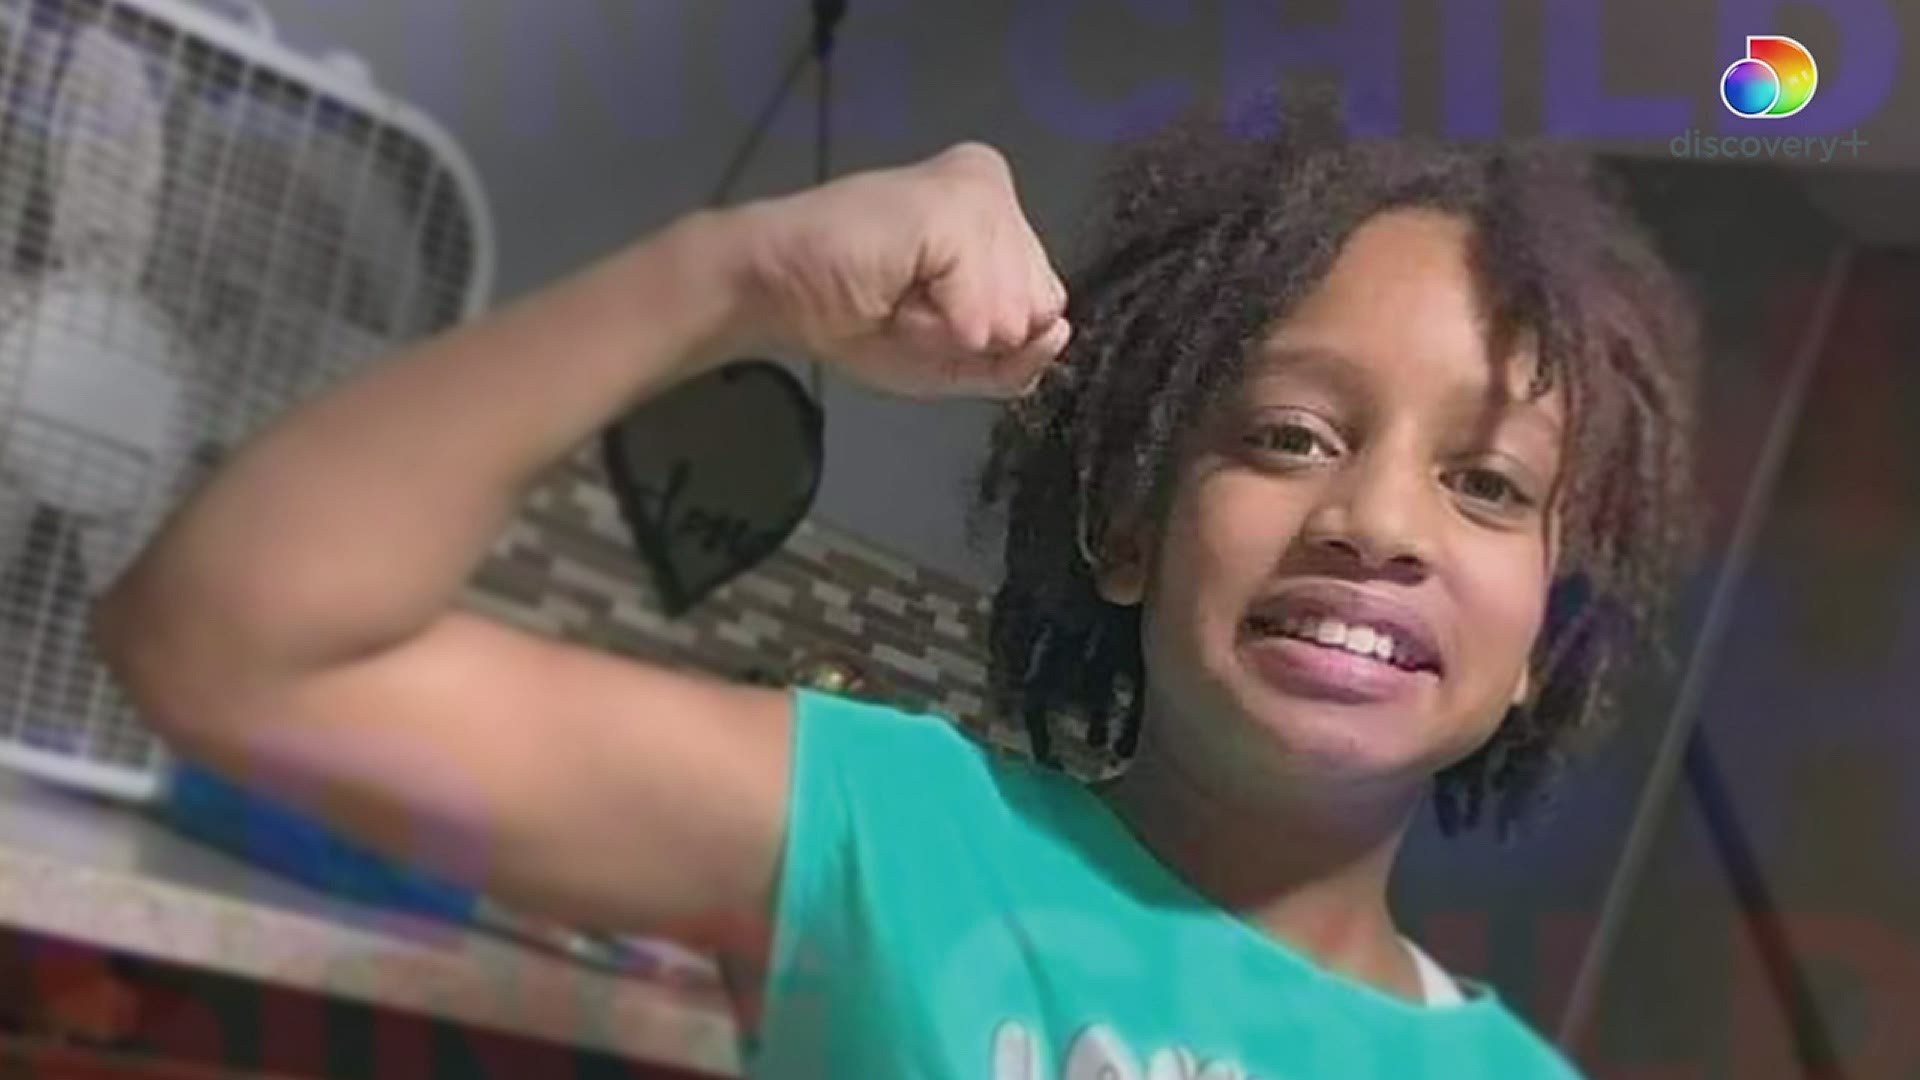 The case of Breasia Terrell, a now-11-year-old Davenport girl who disappeared in 2020, will be featured on an Investigation Discovery show called "In Pursuit."